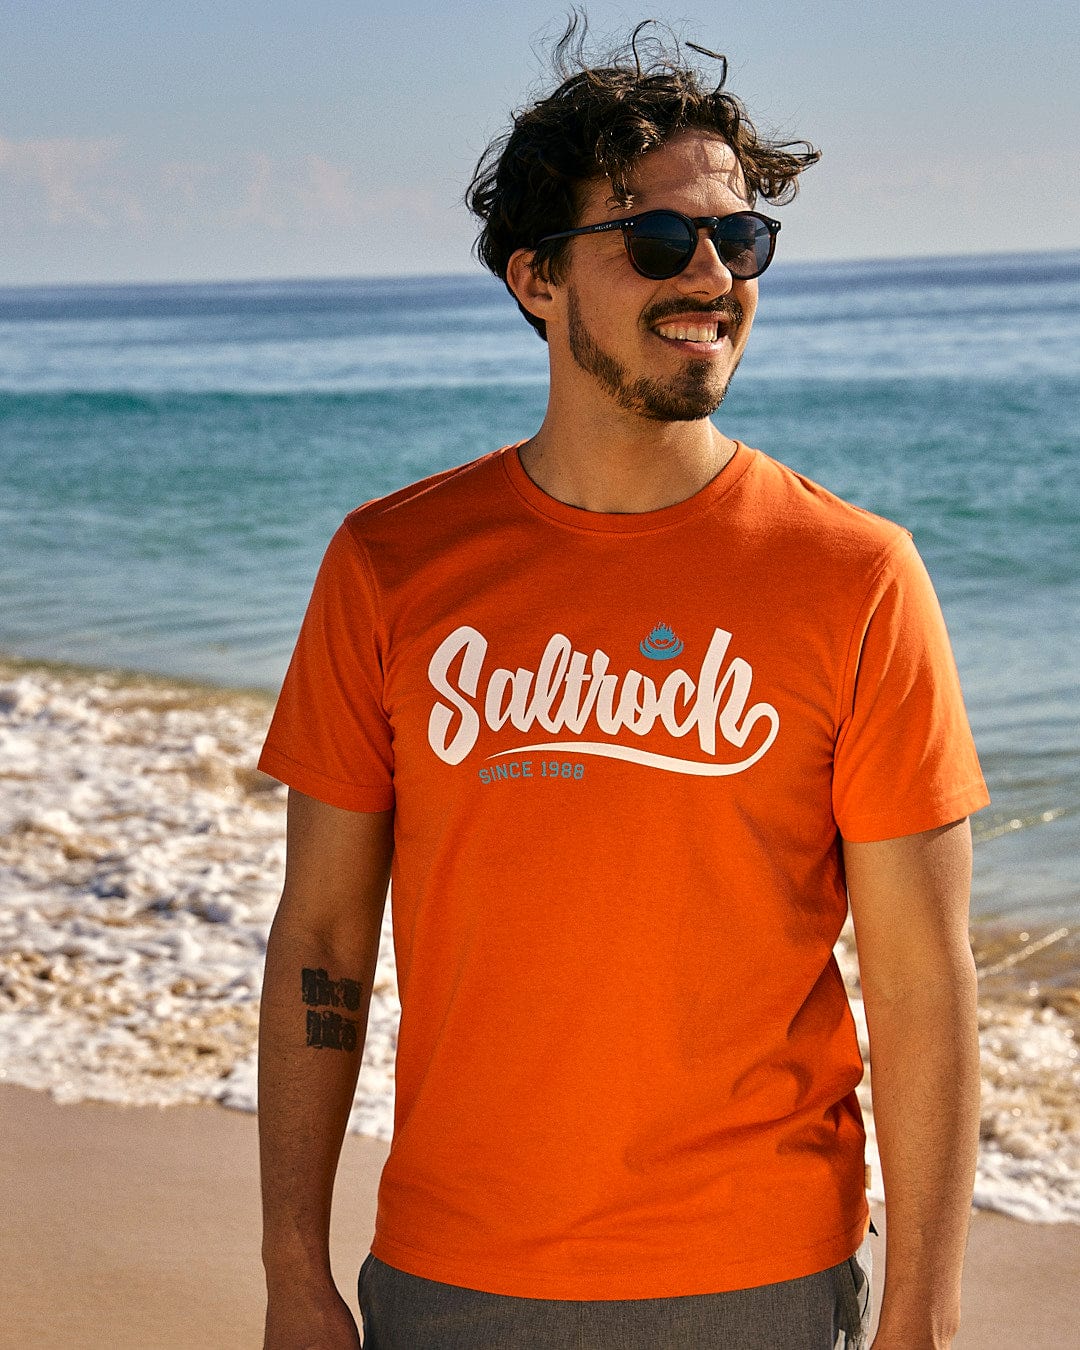 A man wearing sunglasses and a Speed - Mens Short Sleeve T-Shirt - Red by Saltrock standing on the beach.